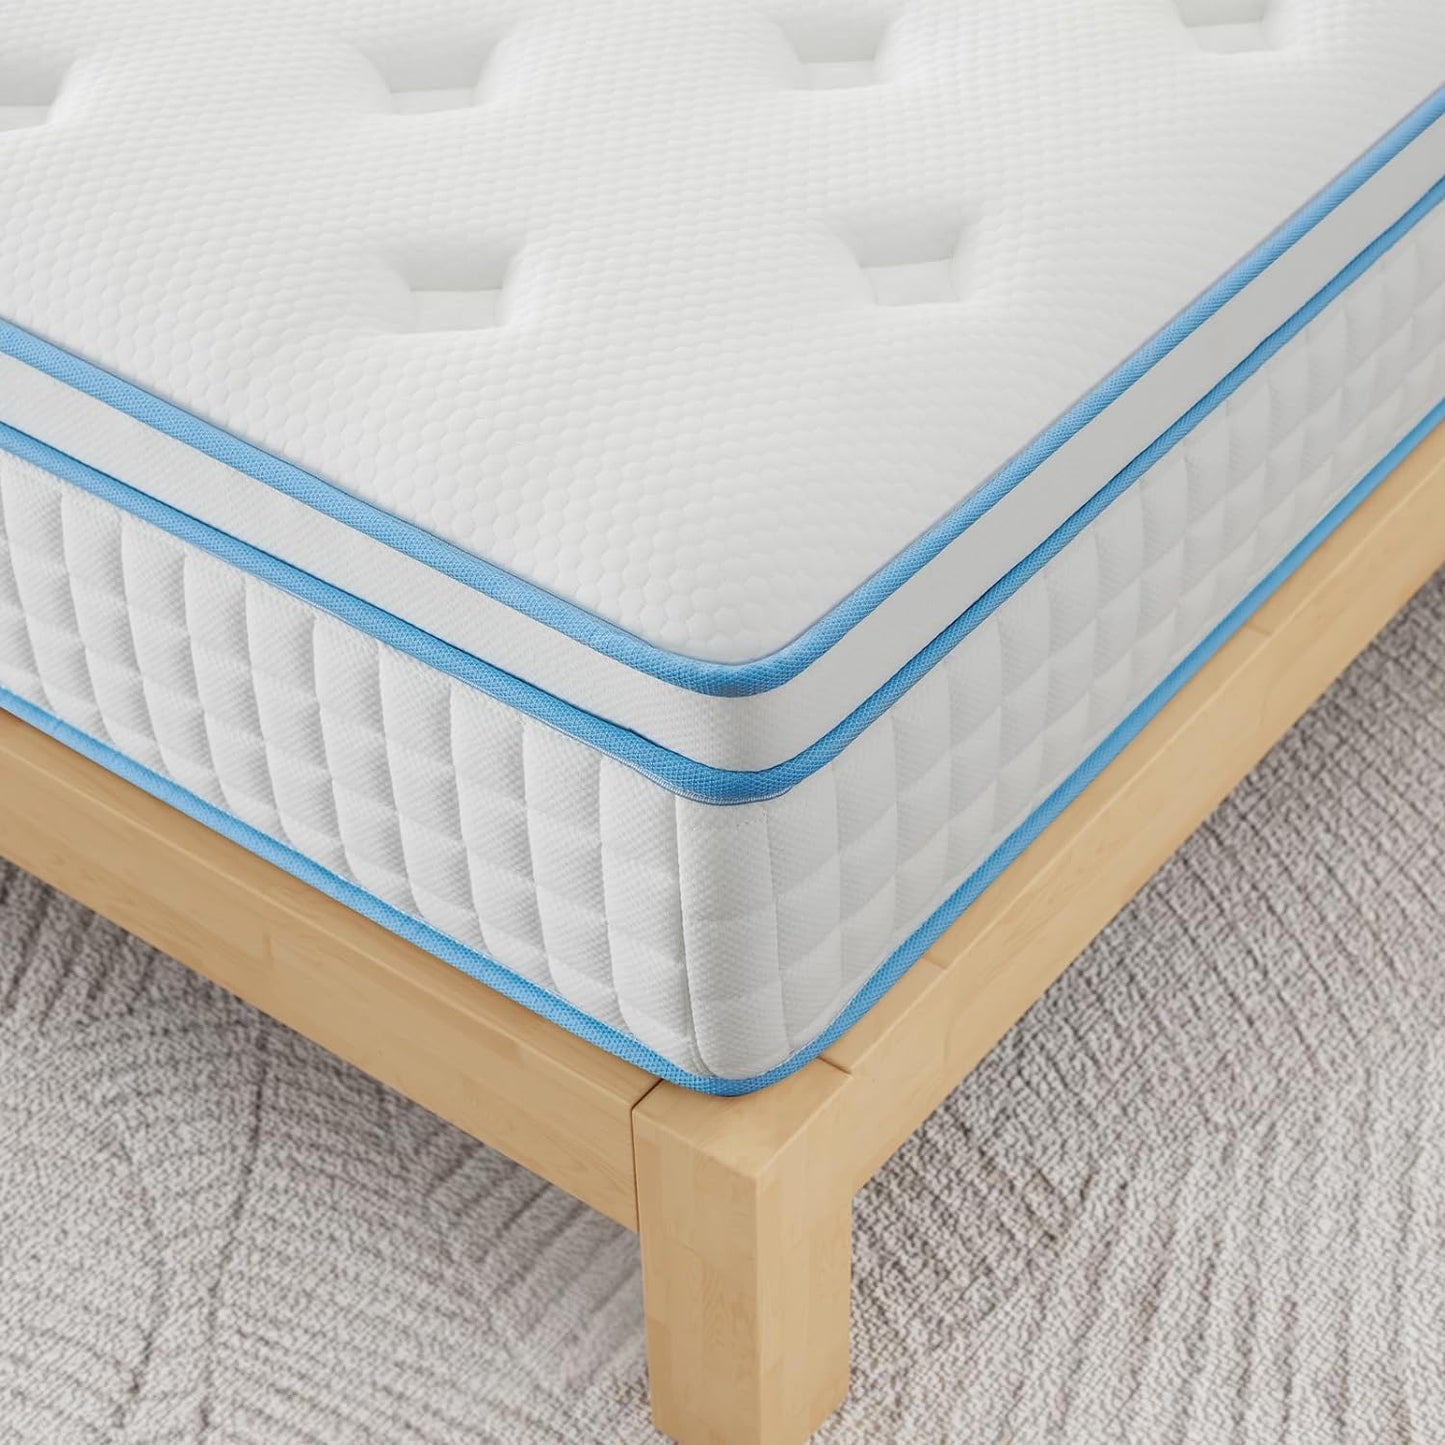 12 Inch Full Size Mattress,Cooling-Gel Memory Foam and Individually Pocket Innerspring Hybrid Bed Mattress